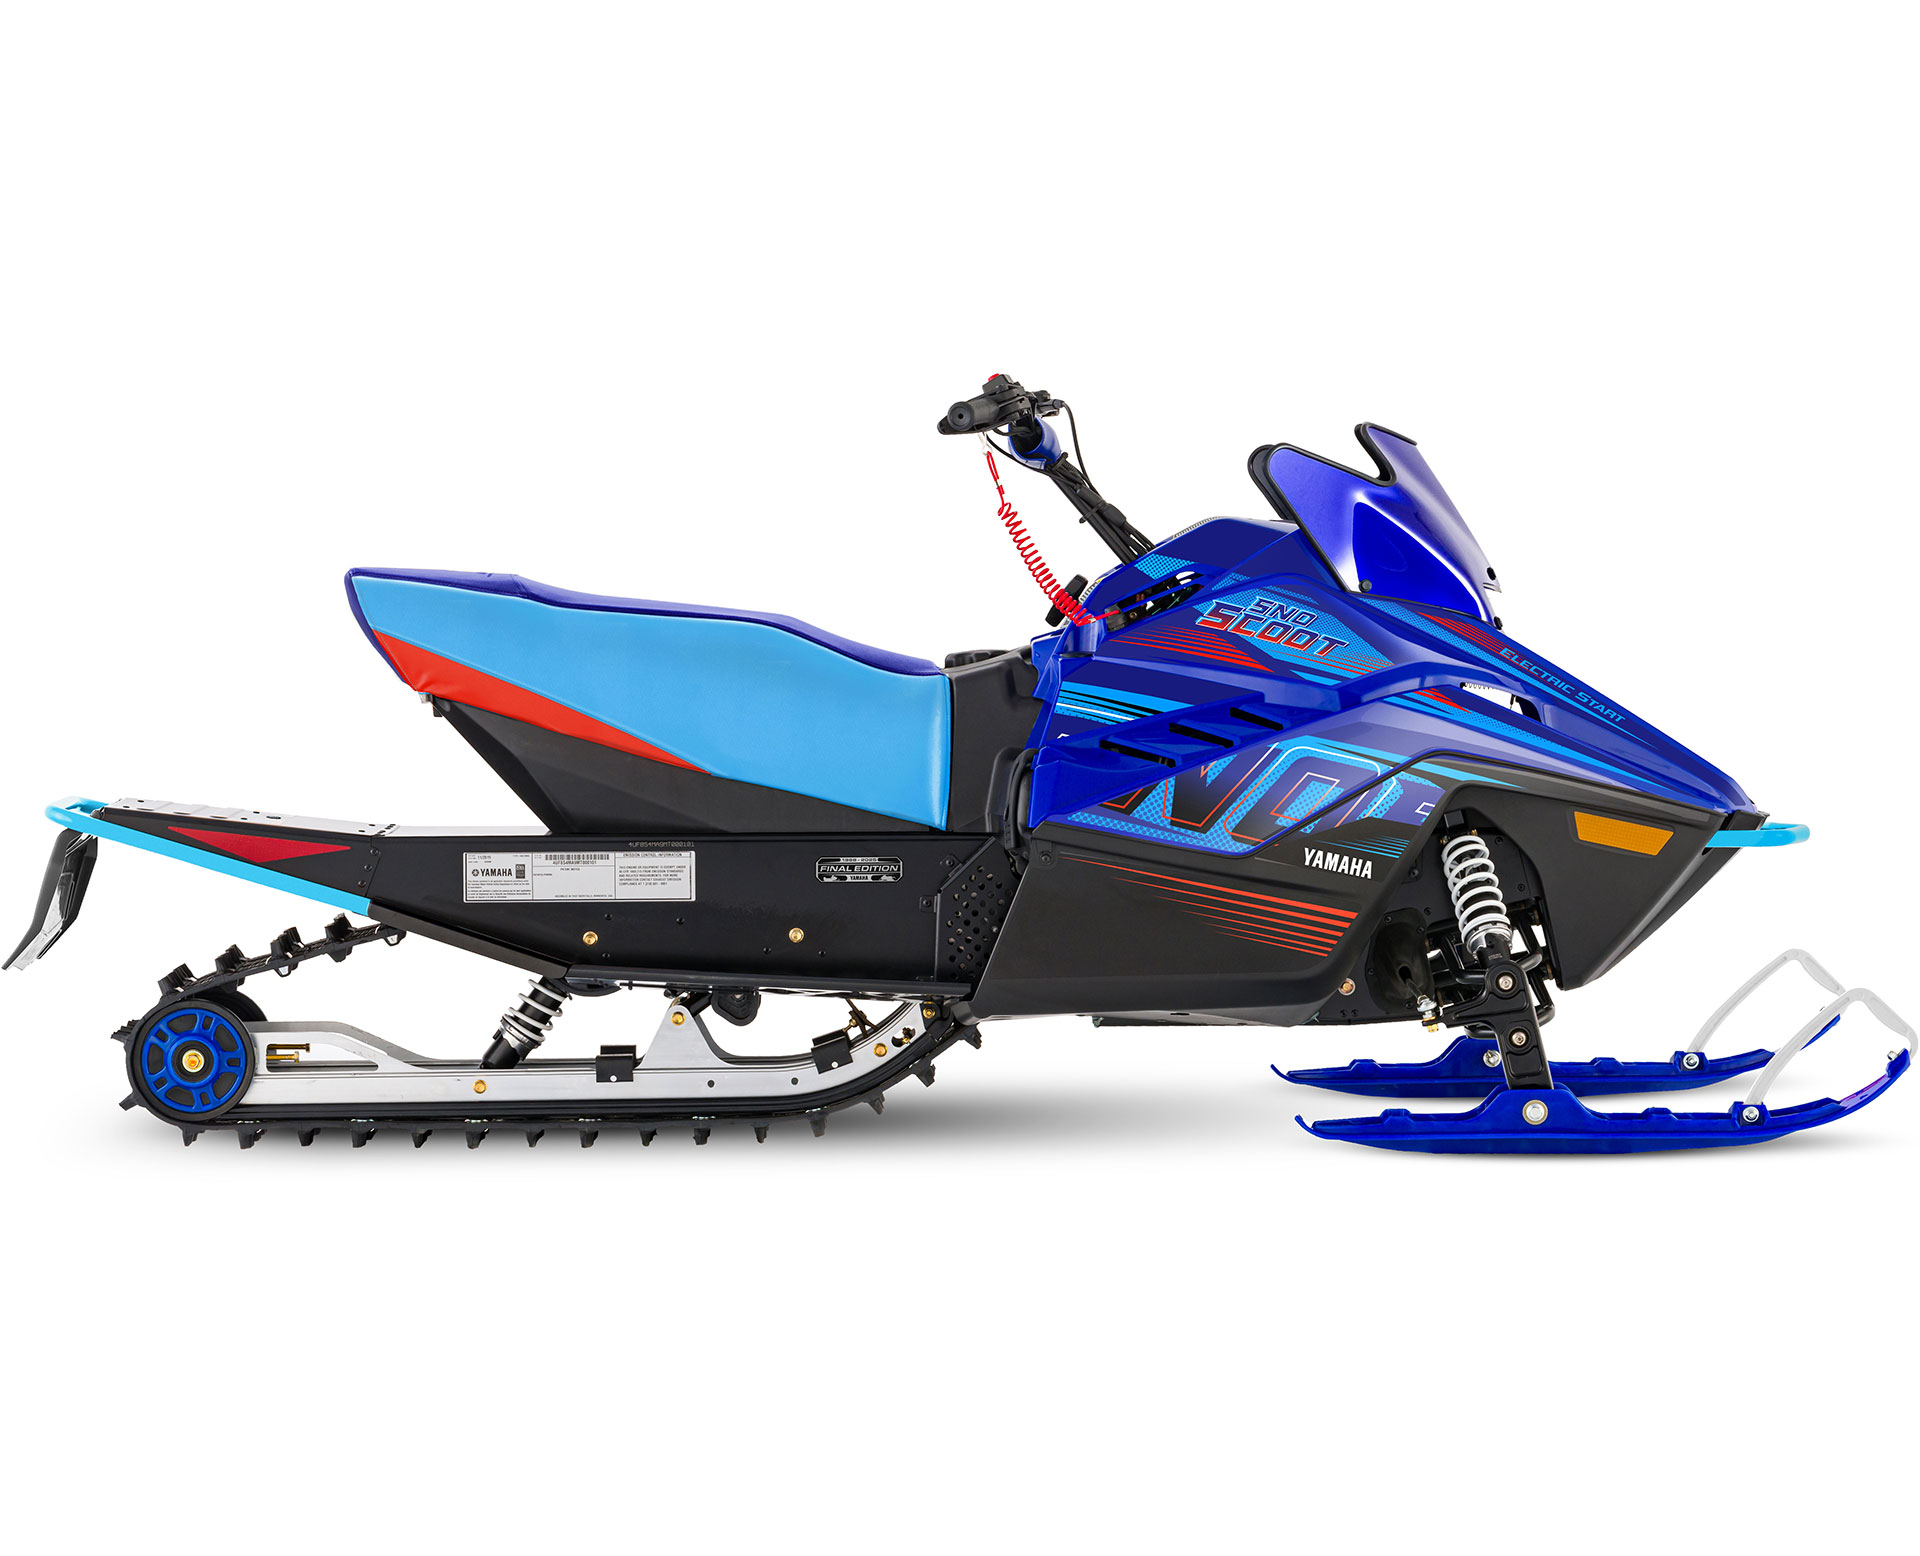 Thumbnail of your customized 2025 Snoscoot ES